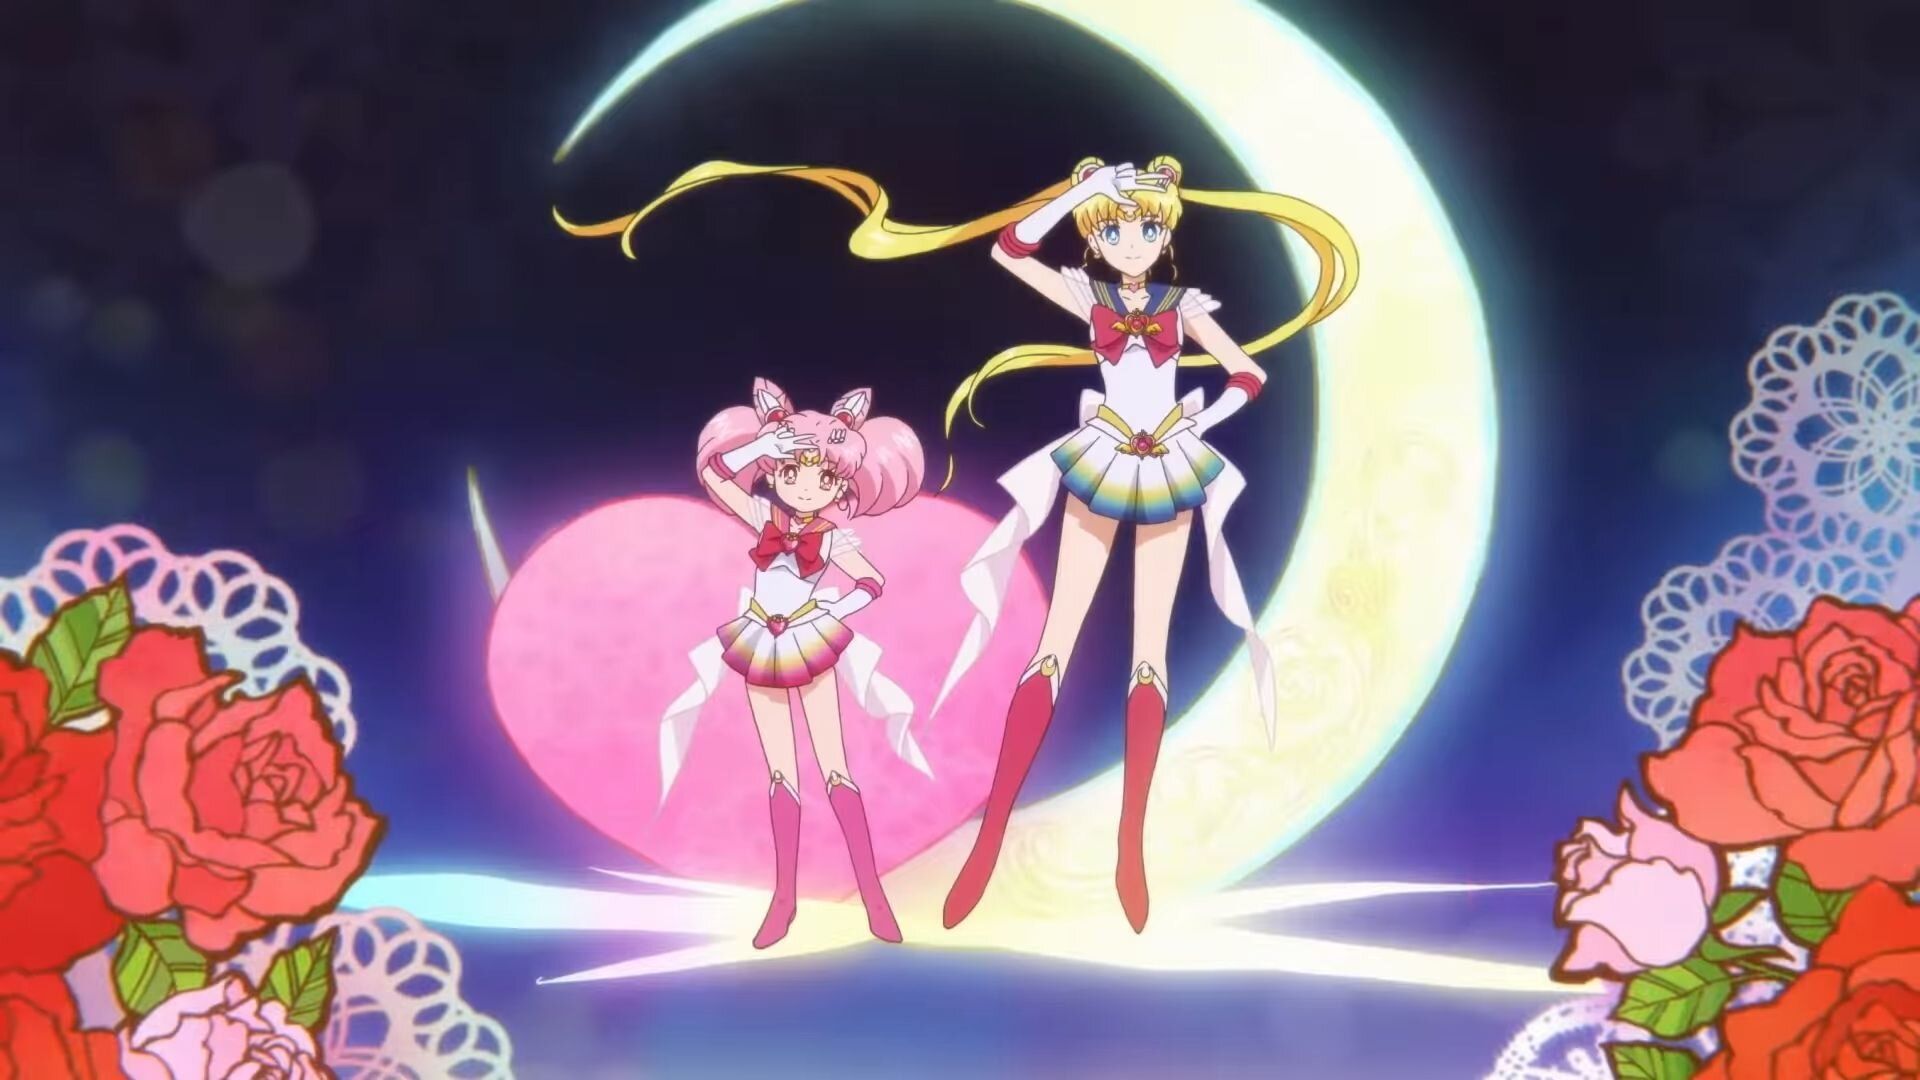 PRETTY GUARDIAN SAILOR MOON ETERNAL: THE MOVIE Gets a New Teaser for January Release in Japan